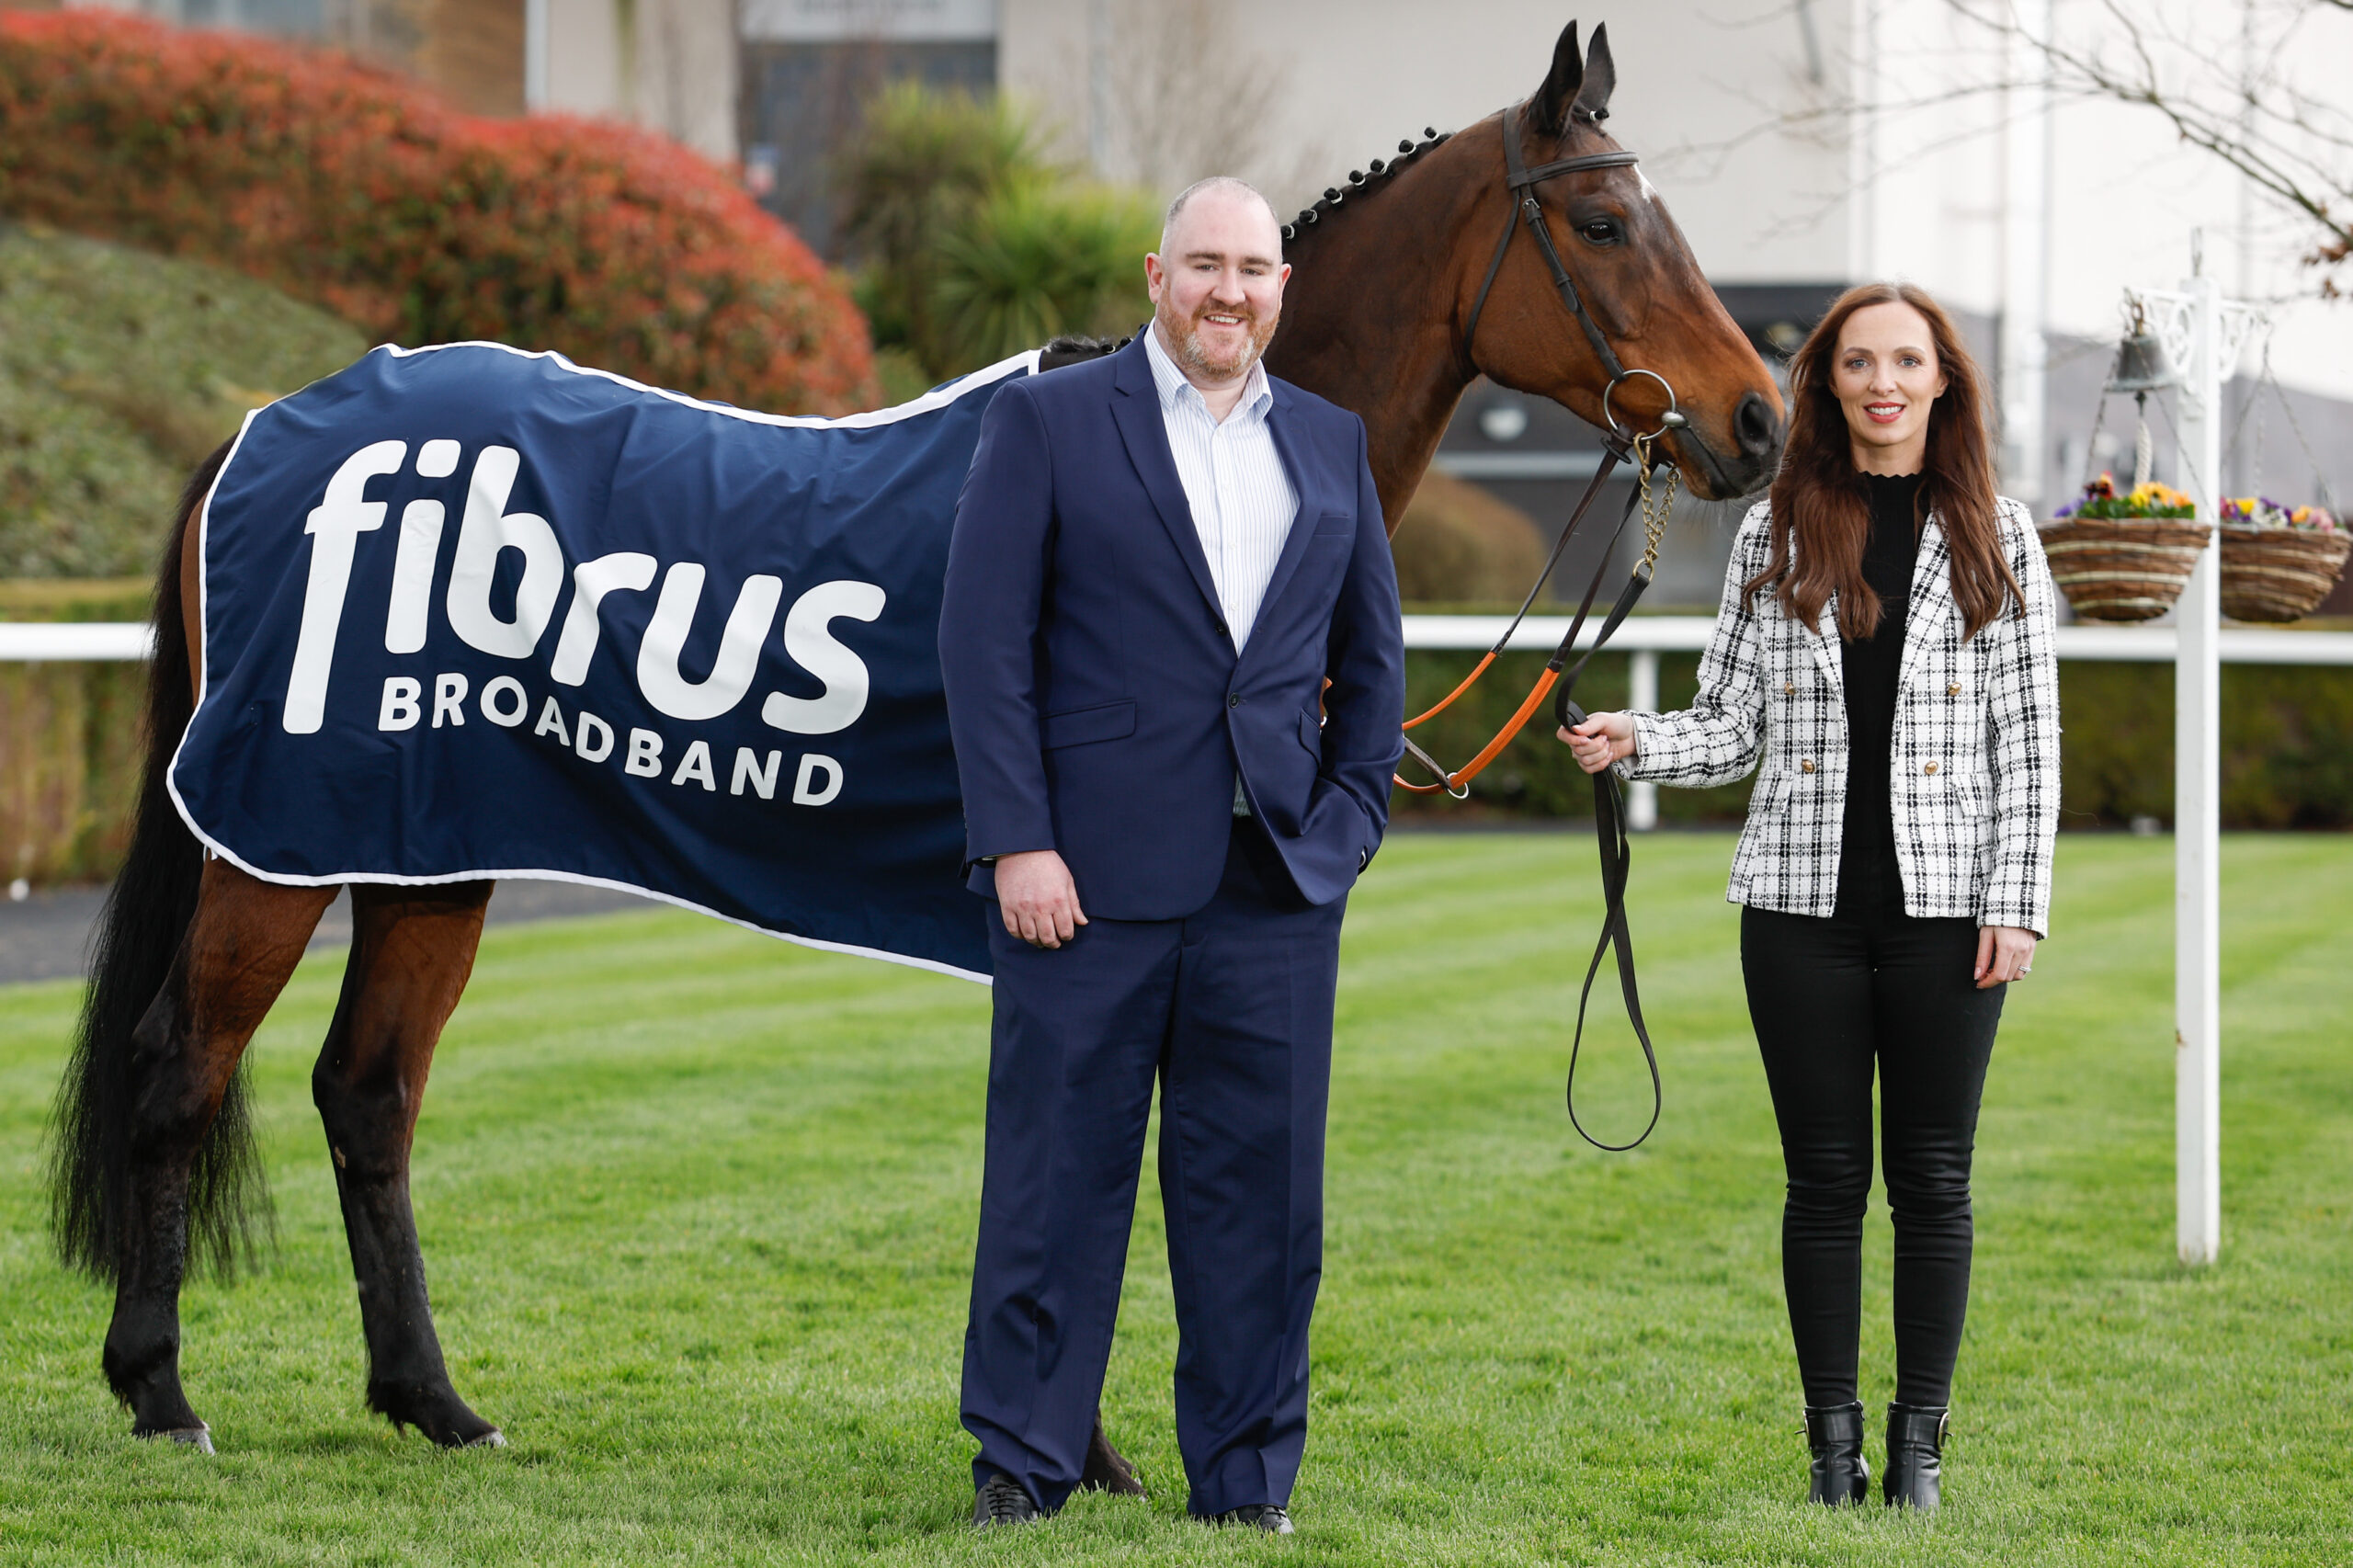 Fibrus are off to the races as Down Royal Racecourse launches new family fixture